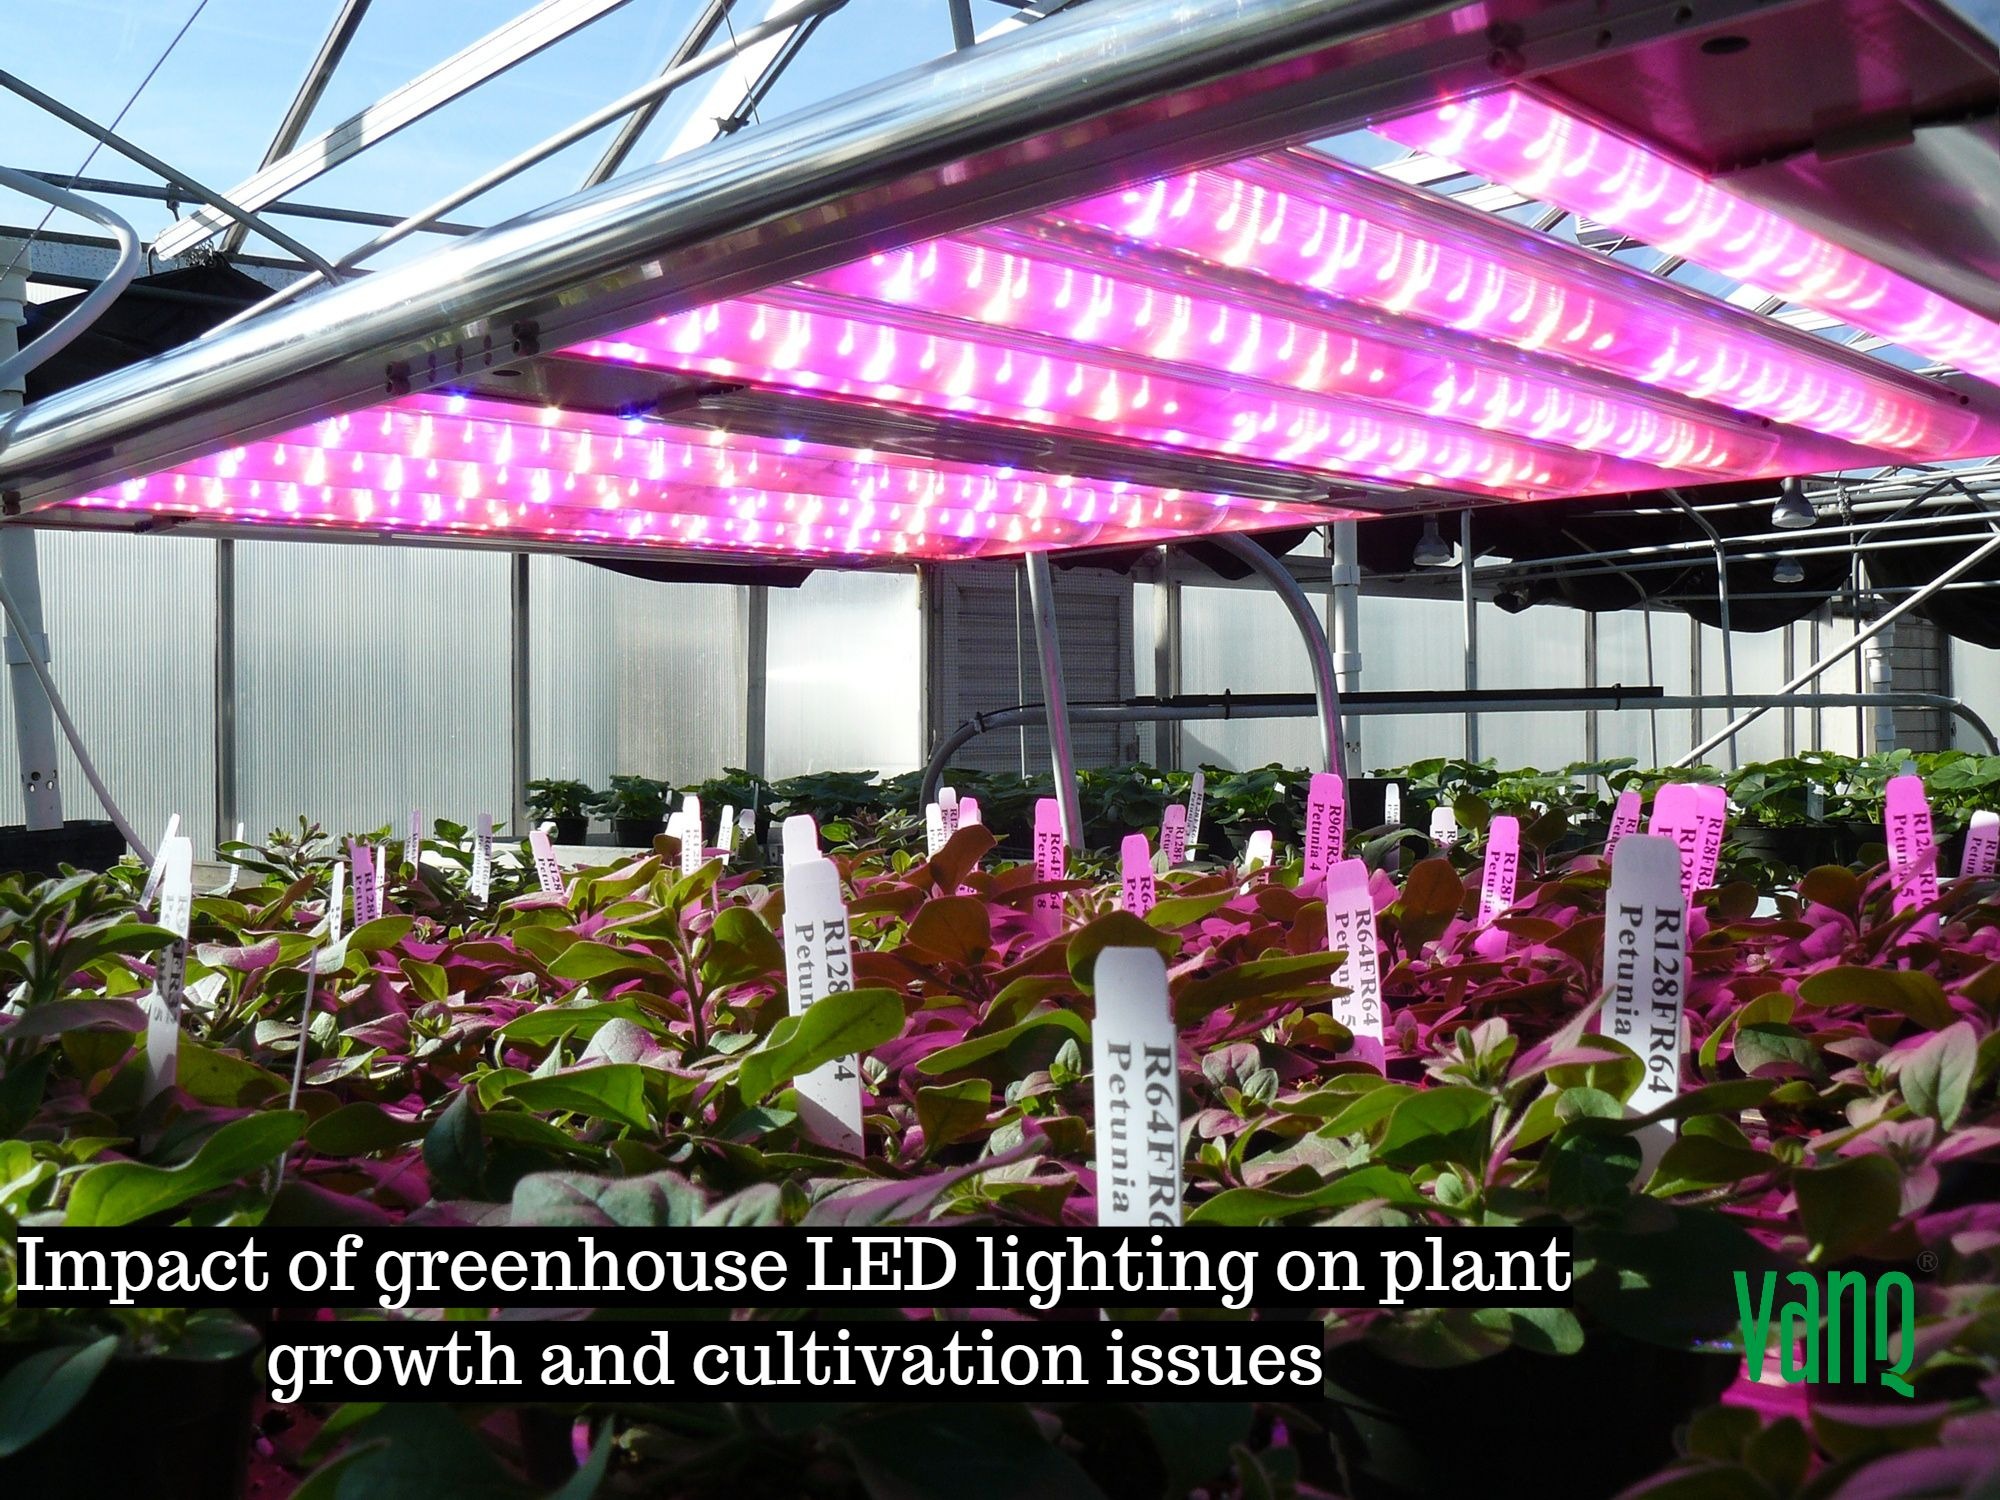 Impact of greenhouse LED lighting on plant growth and cultivation issues